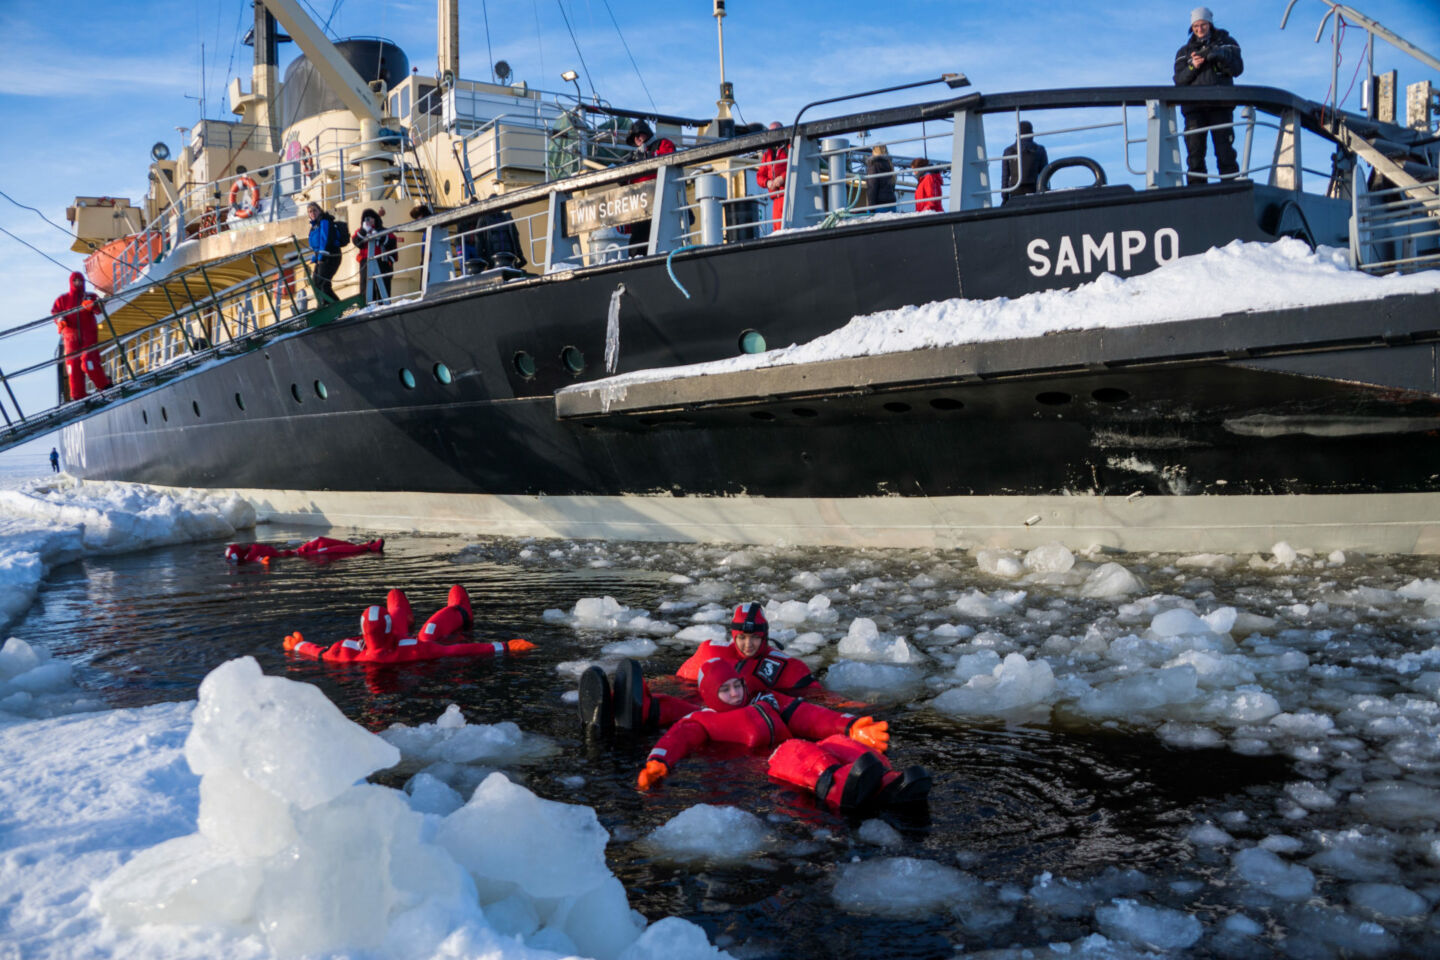 Ice floating near the Icebreaker Sampo in the frozen sea in Kemi, a Finnish Lapland holiday destination